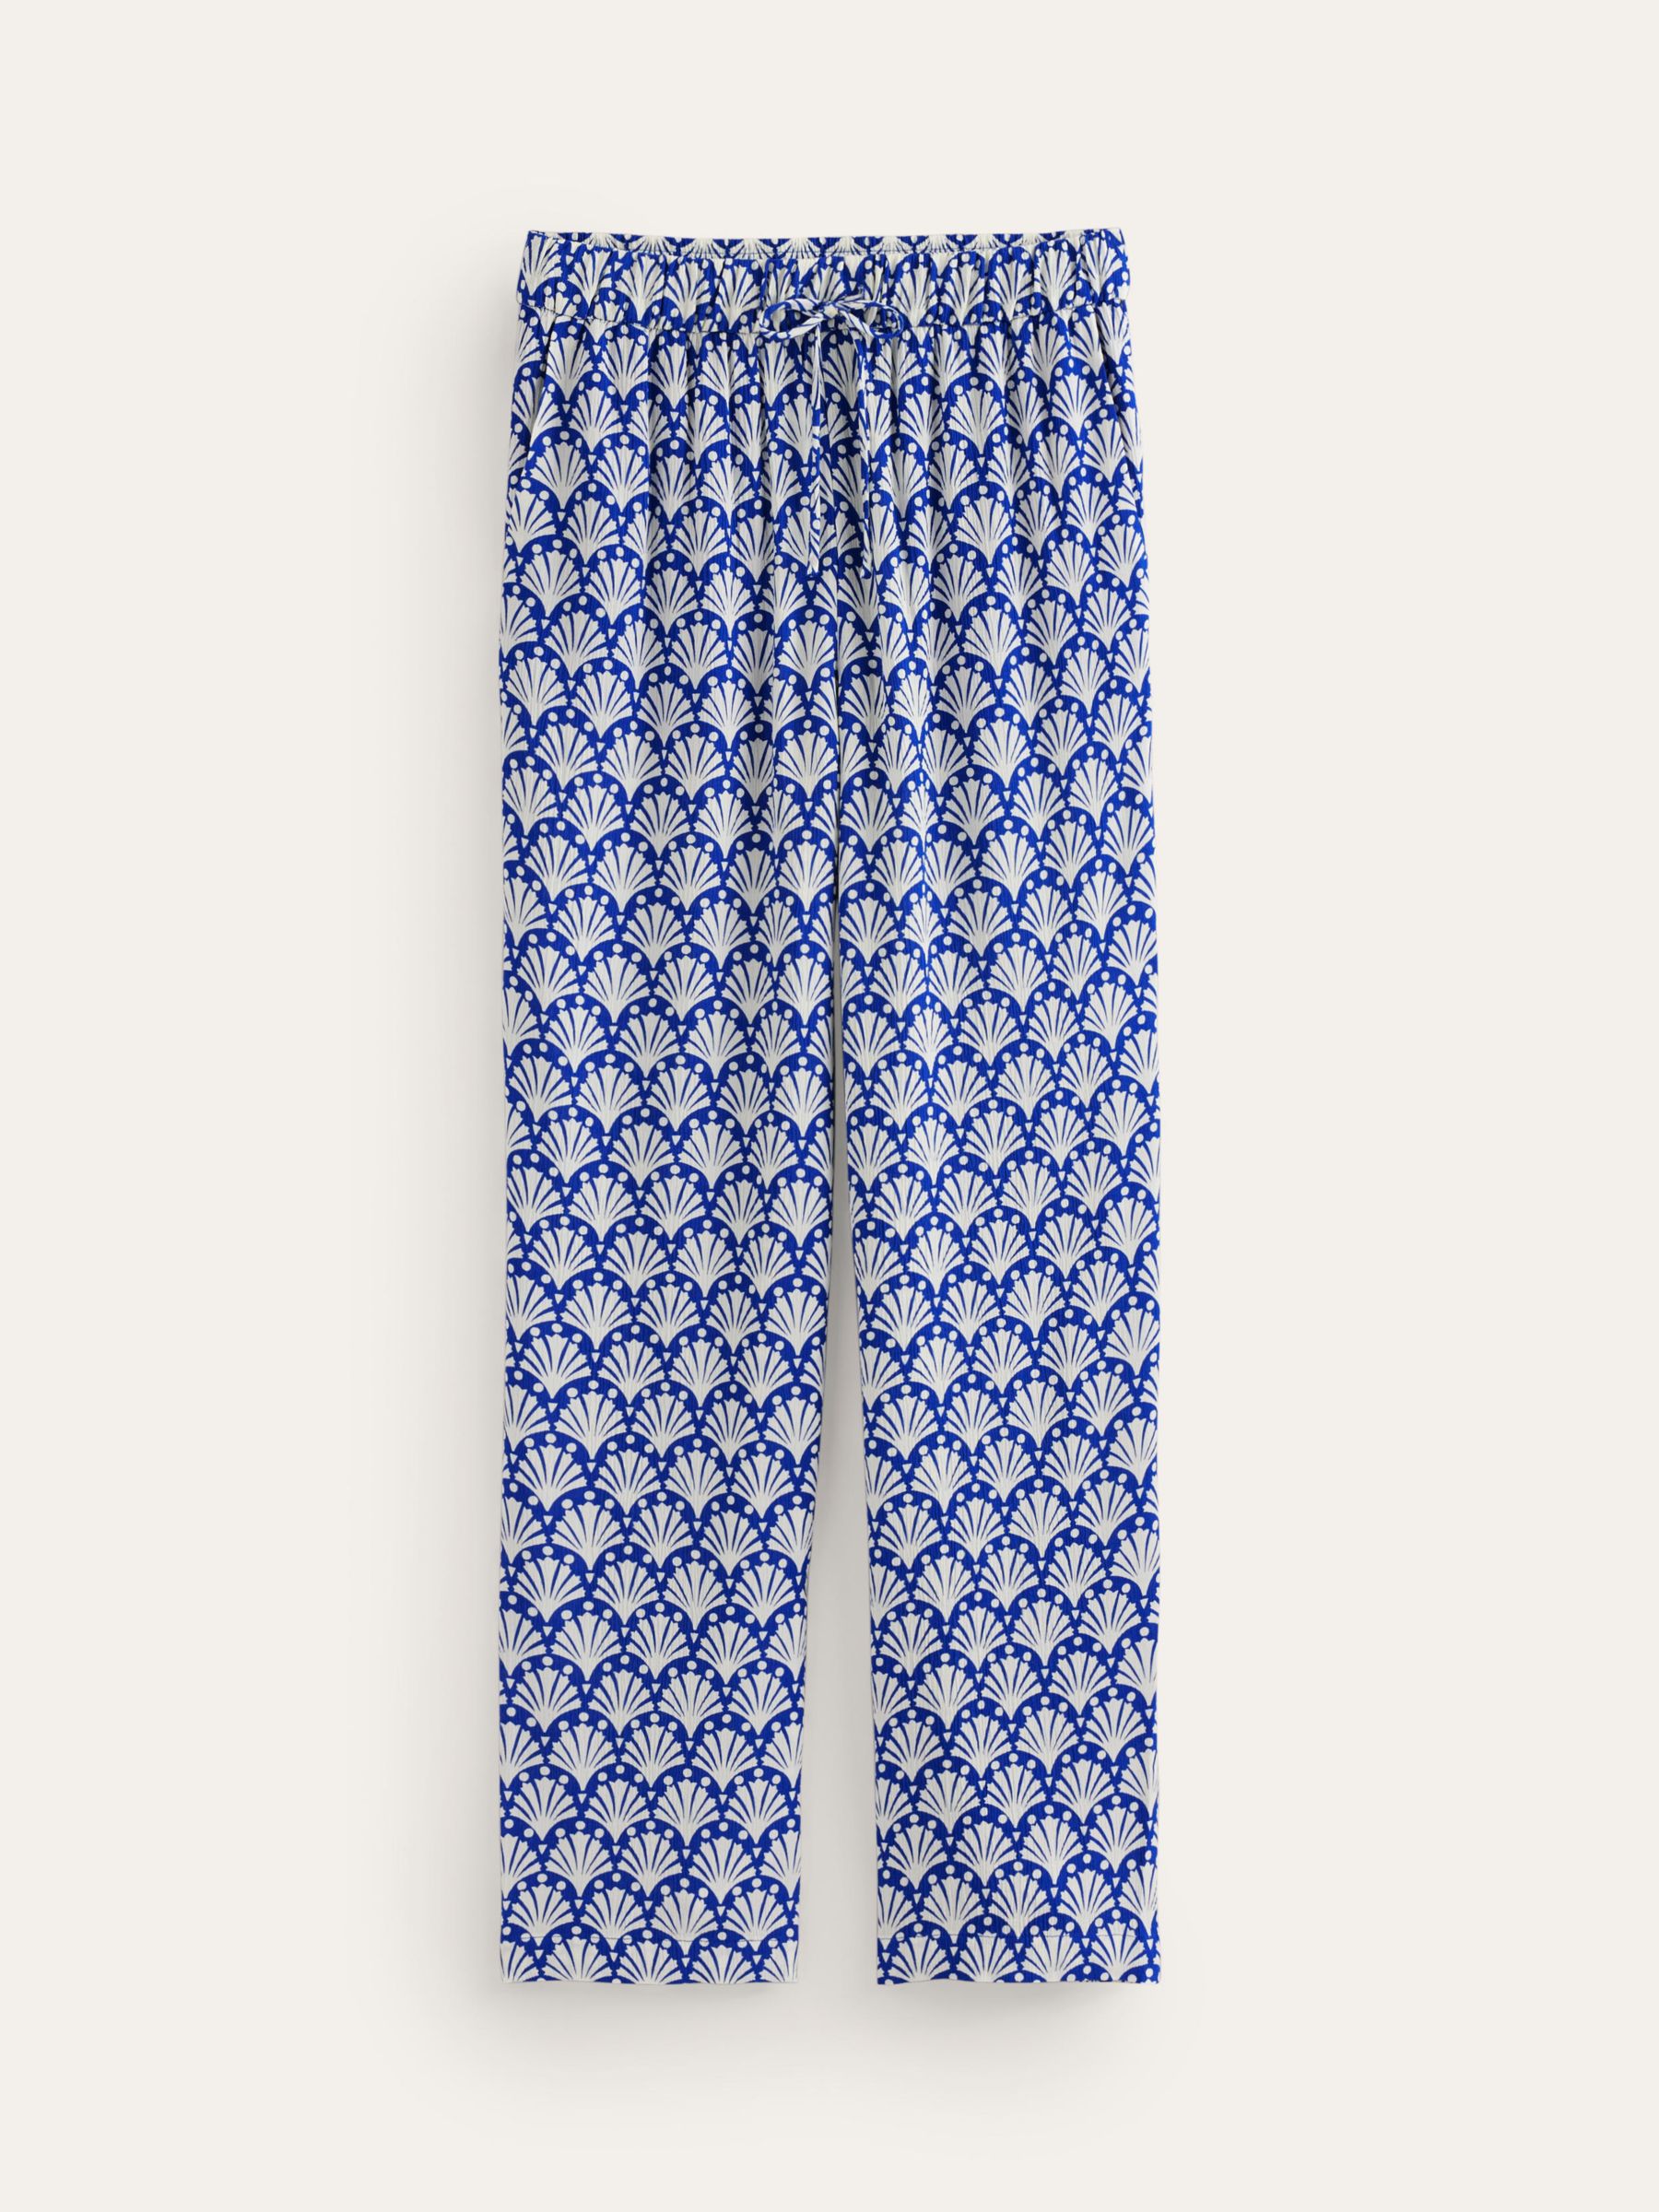 Boden Shells Print Crinkle Tapered Trousers, Ivory/Blue, 16